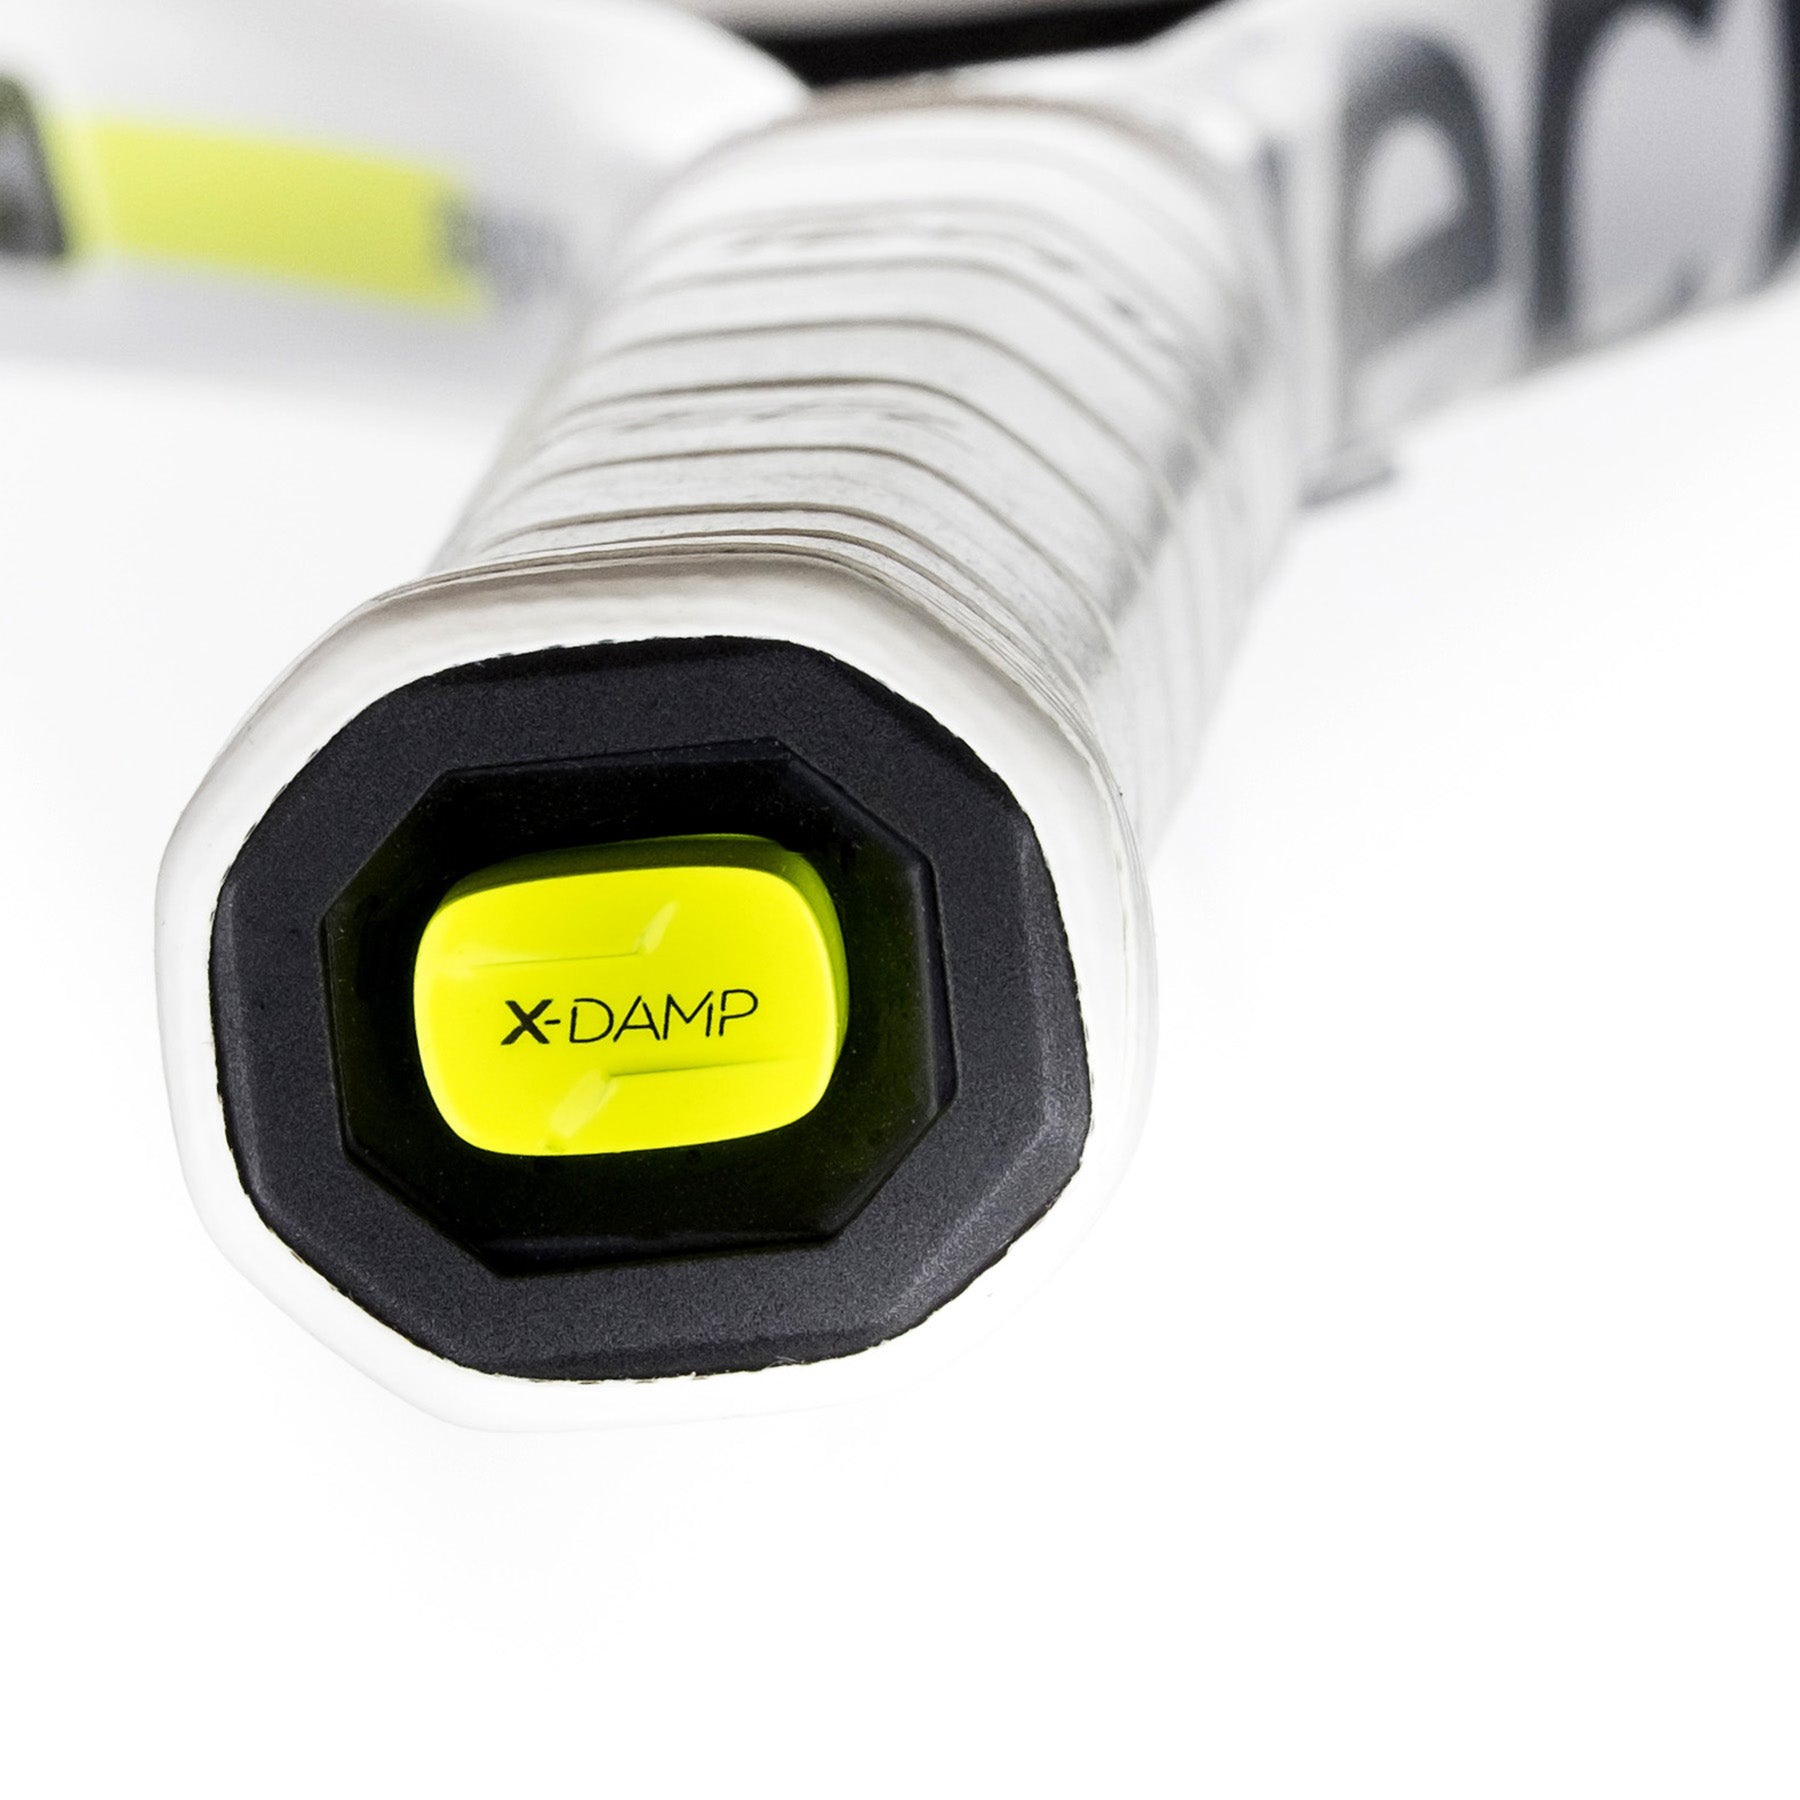 Close-up of the Tecnifibre TF-X1 285 Tennis Racket handle equipped with X-Damp technology